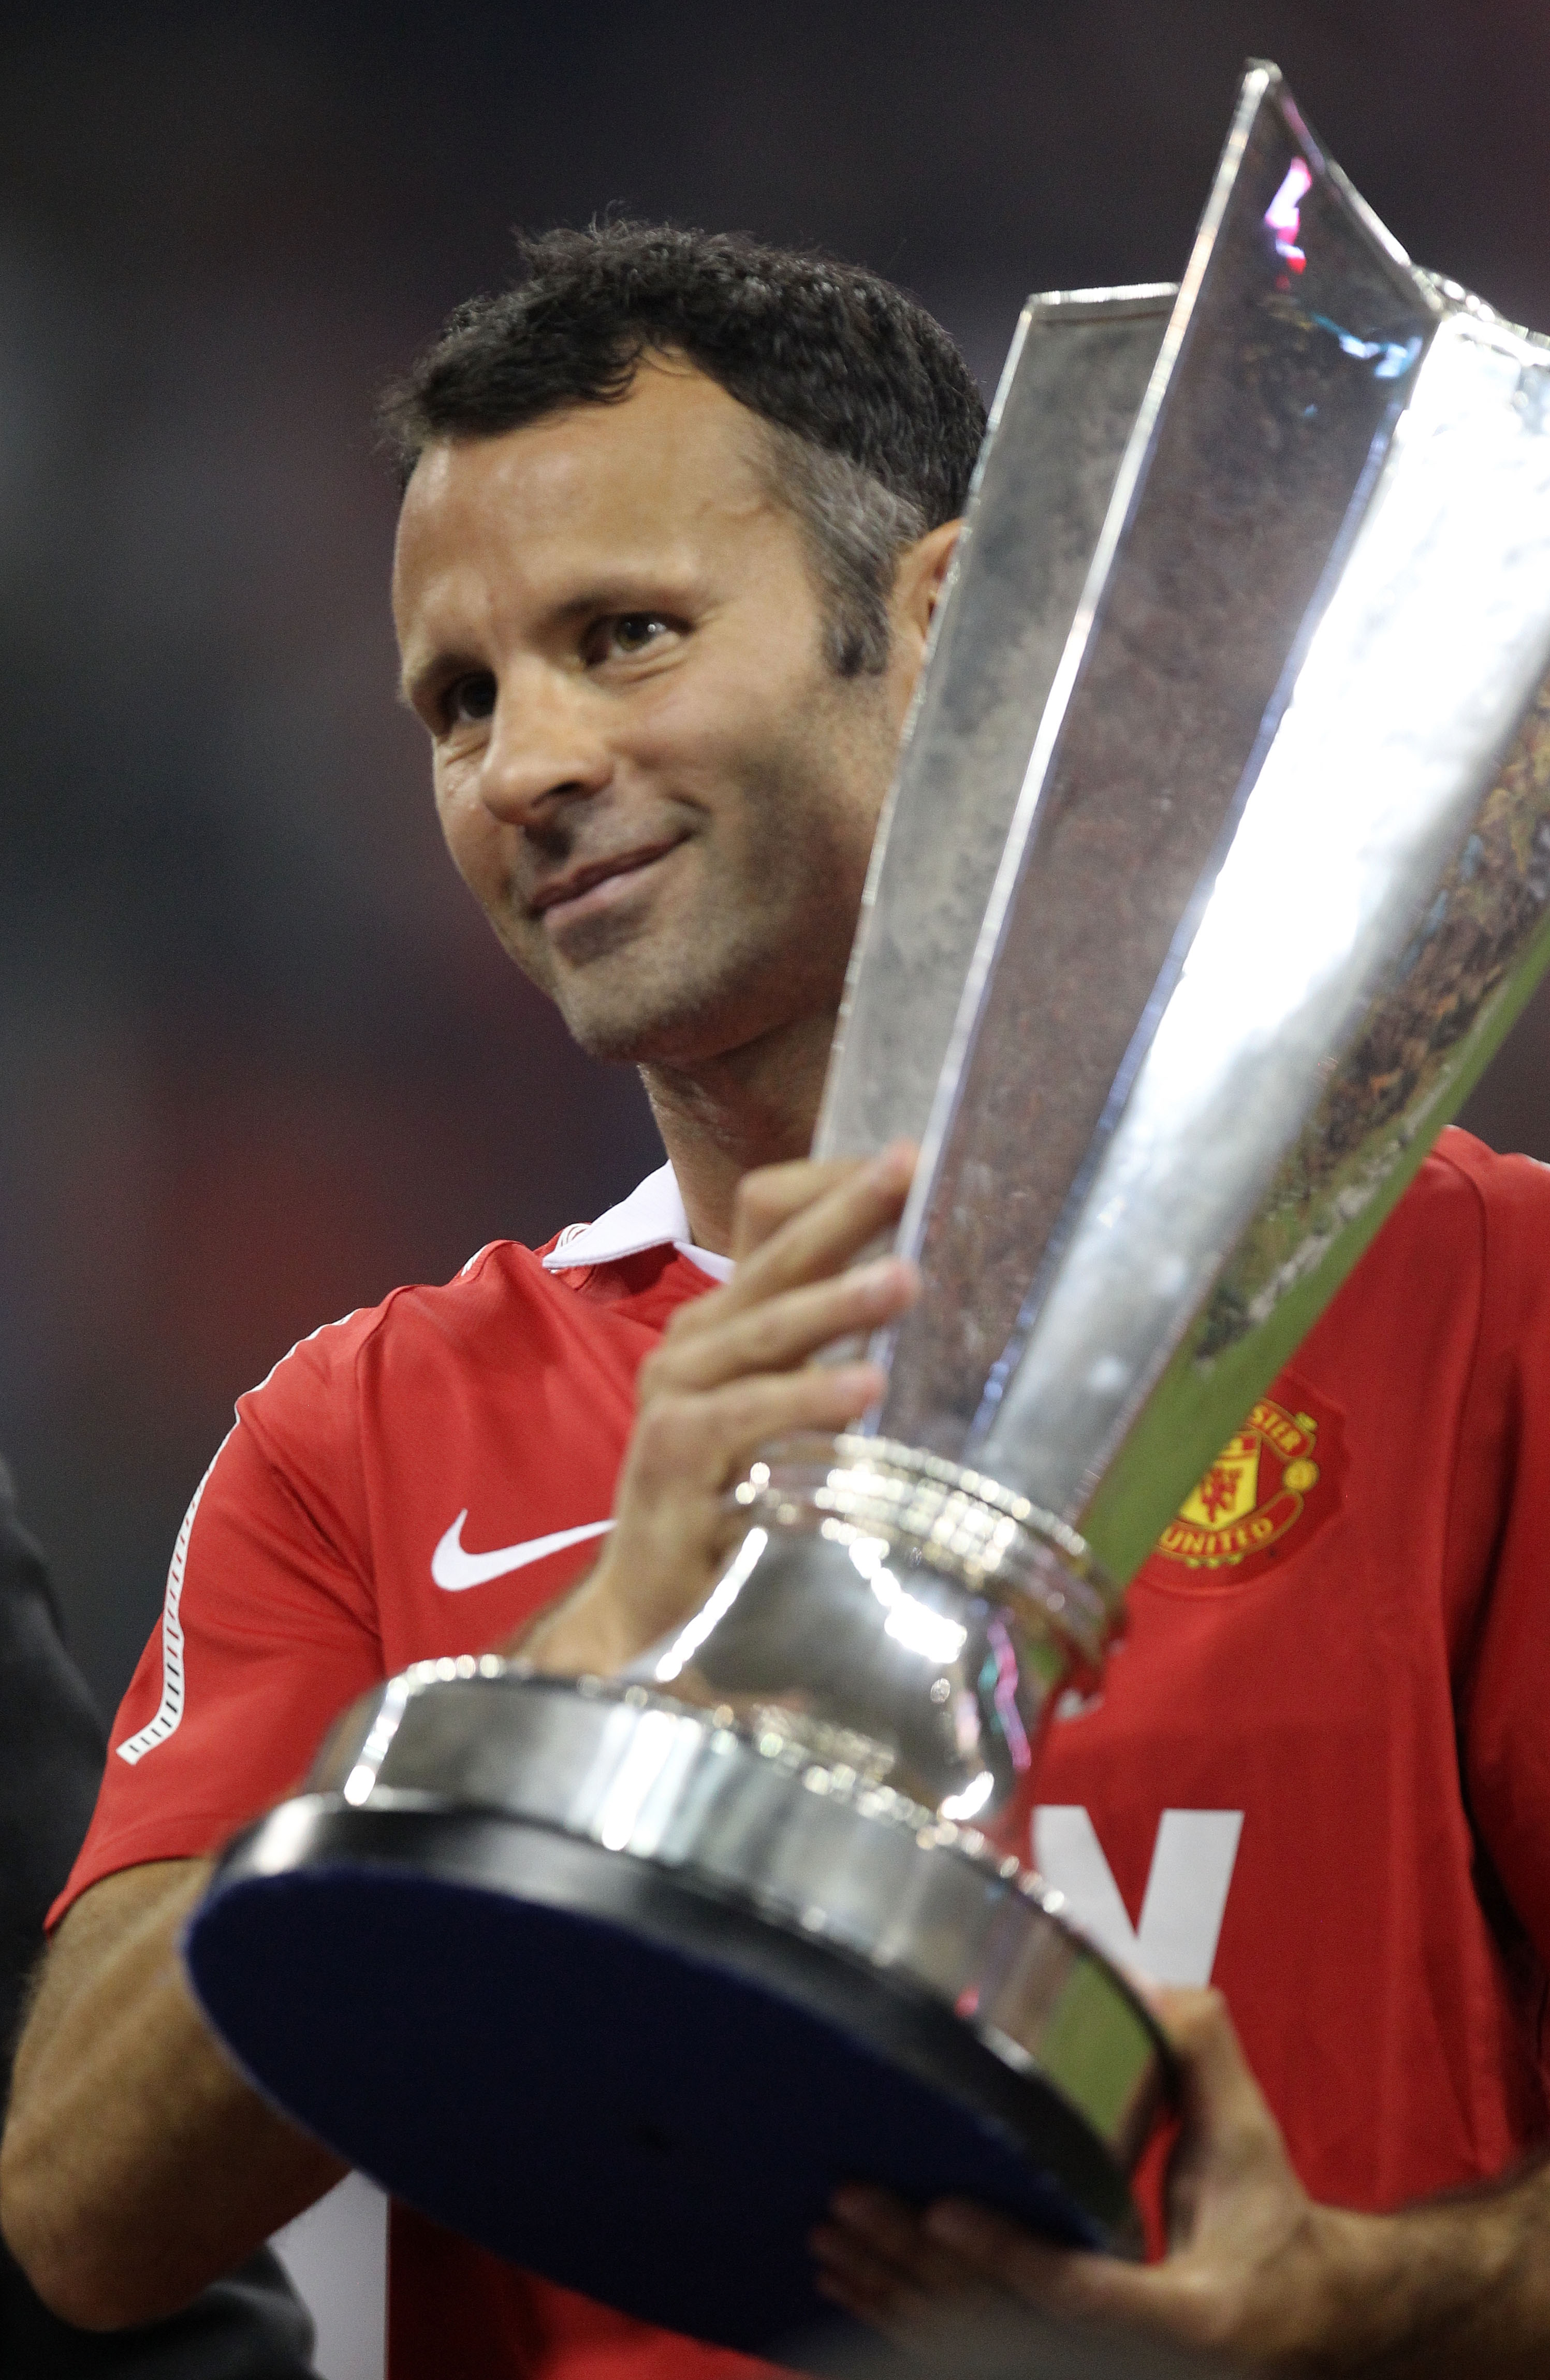 HOUSTON - JULY 28:  Ryan Giggs #11 of Manchester United holds the All-Star trophy following United's 5-2 win over the MLS All-Stars in the MLS All Star Game at Reliant Stadium on July 28, 2010 in Houston, Texas.  (Photo by Ronald Martinez/Getty Images)